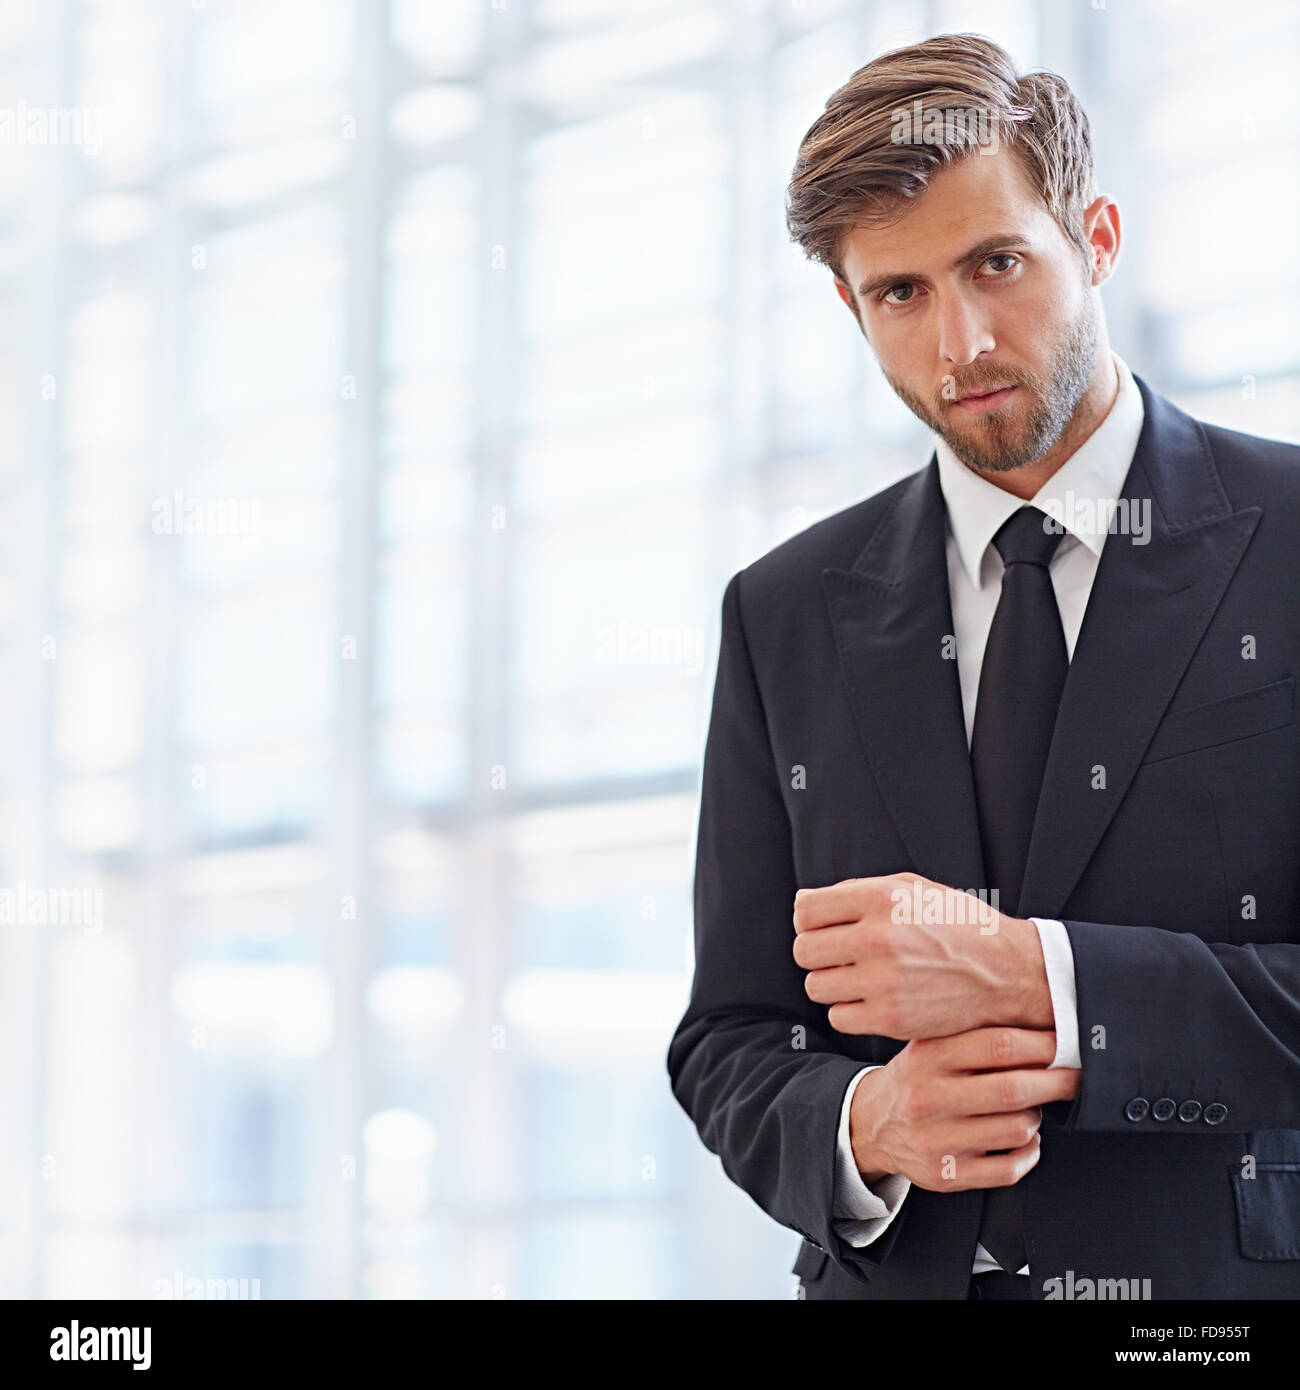 He means business Stock Photo